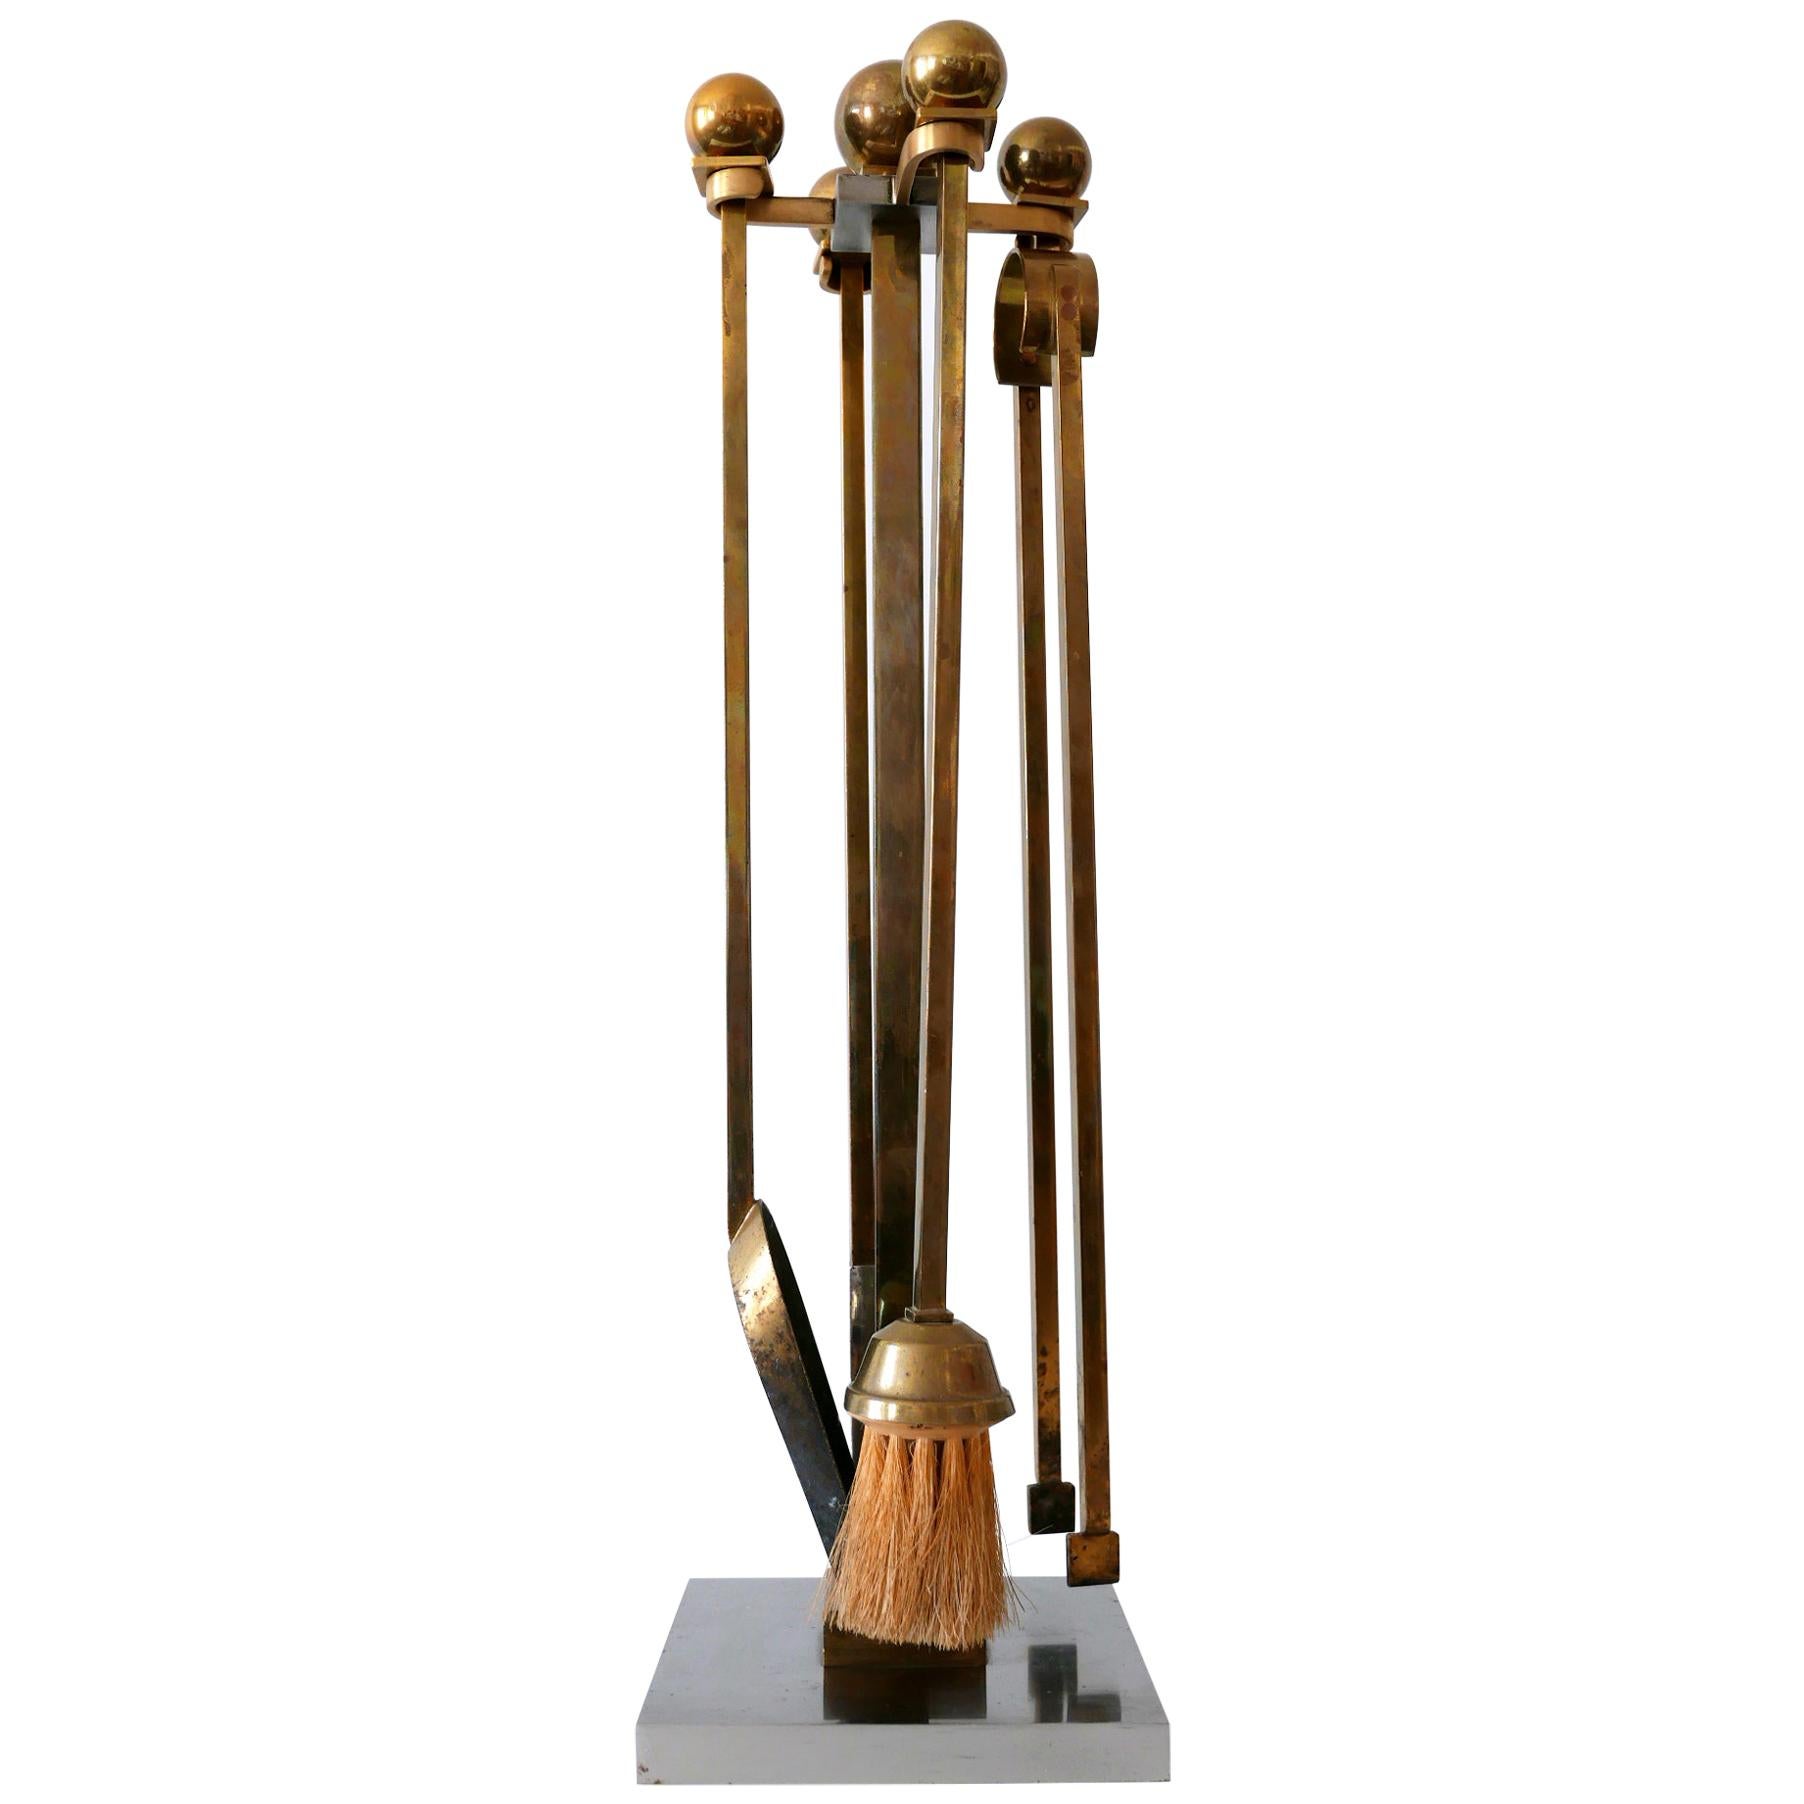 Exceptional Mid-Century Modern Brass and Steel Fireplace Tools 1970s